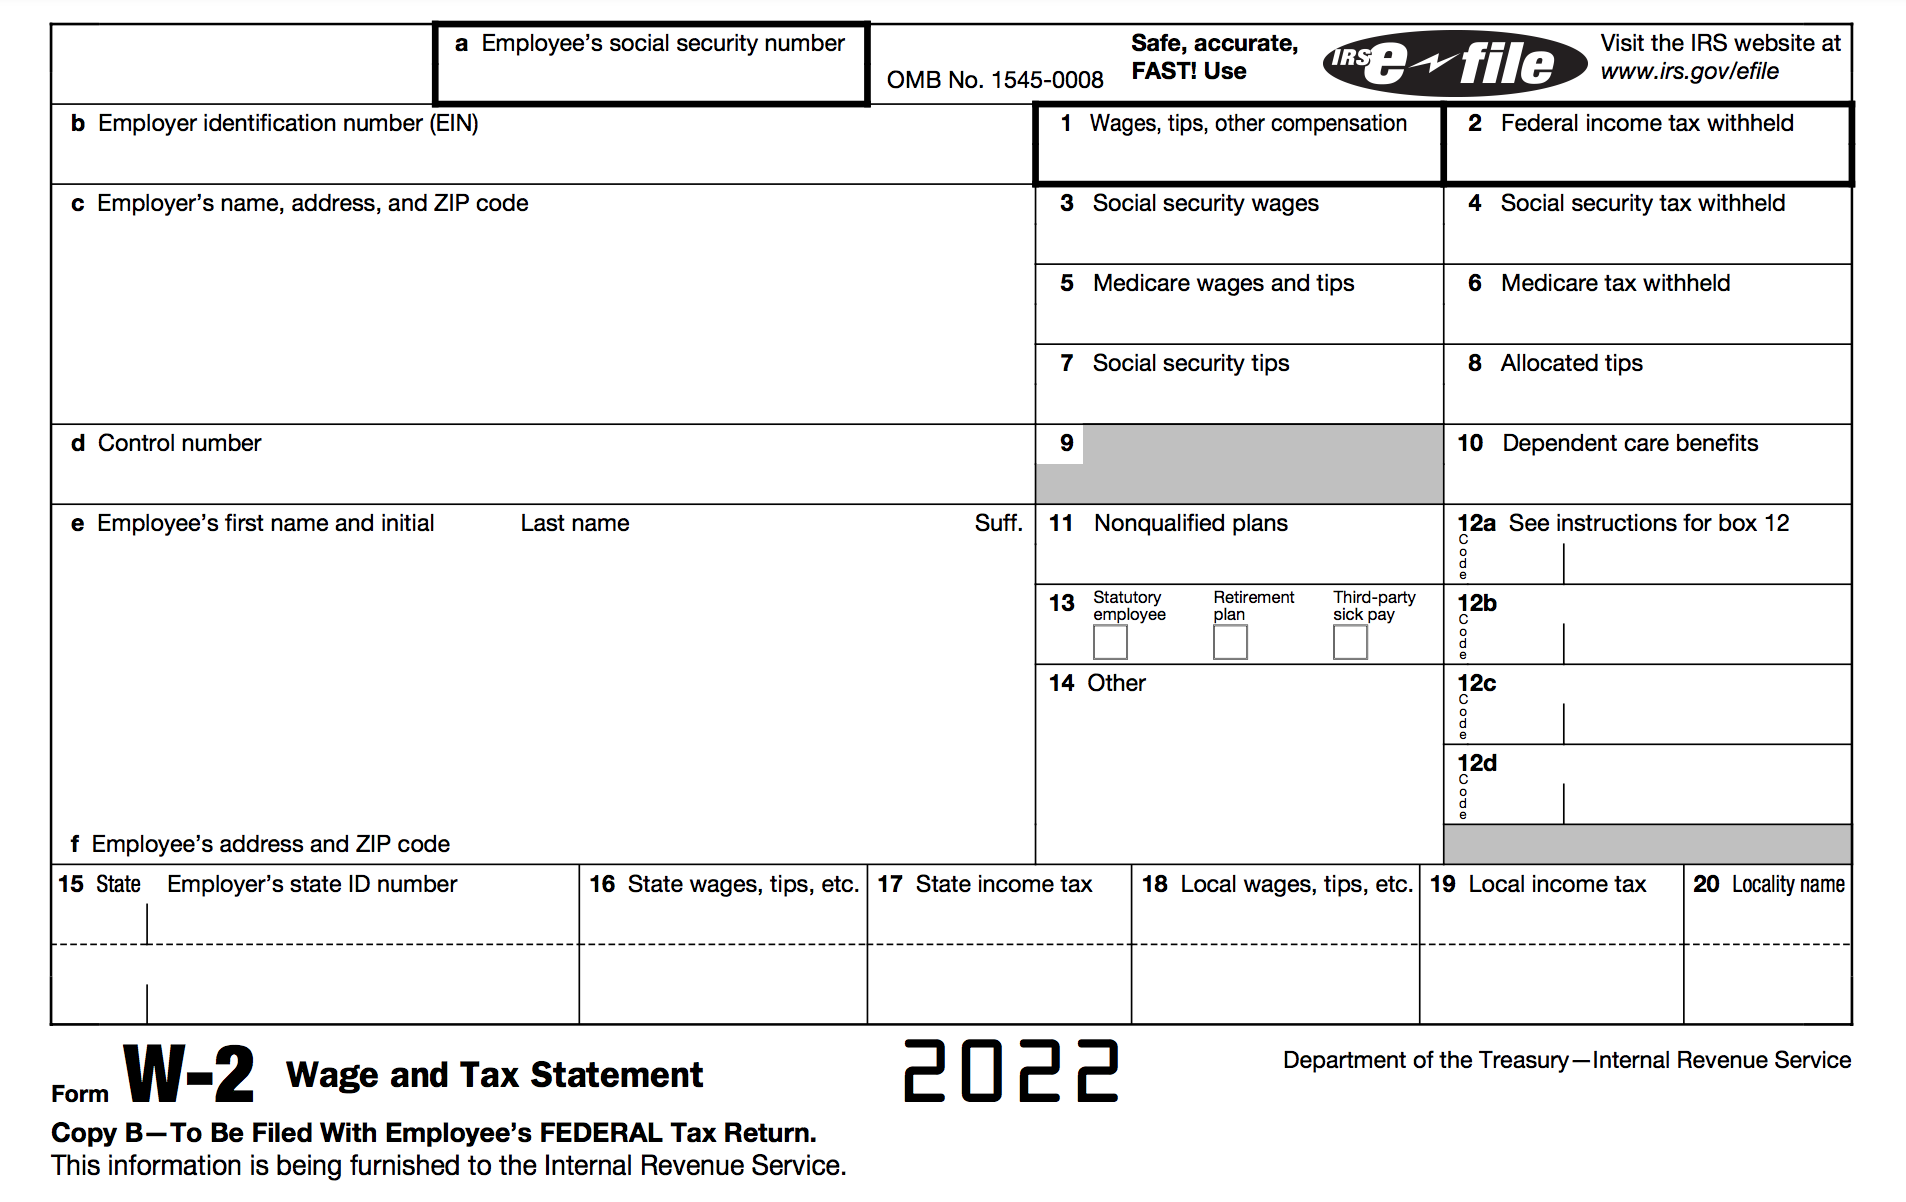 How To Fill Out A W-2 Tax Form | Smartasset with regard to How To Complete A W2 Form